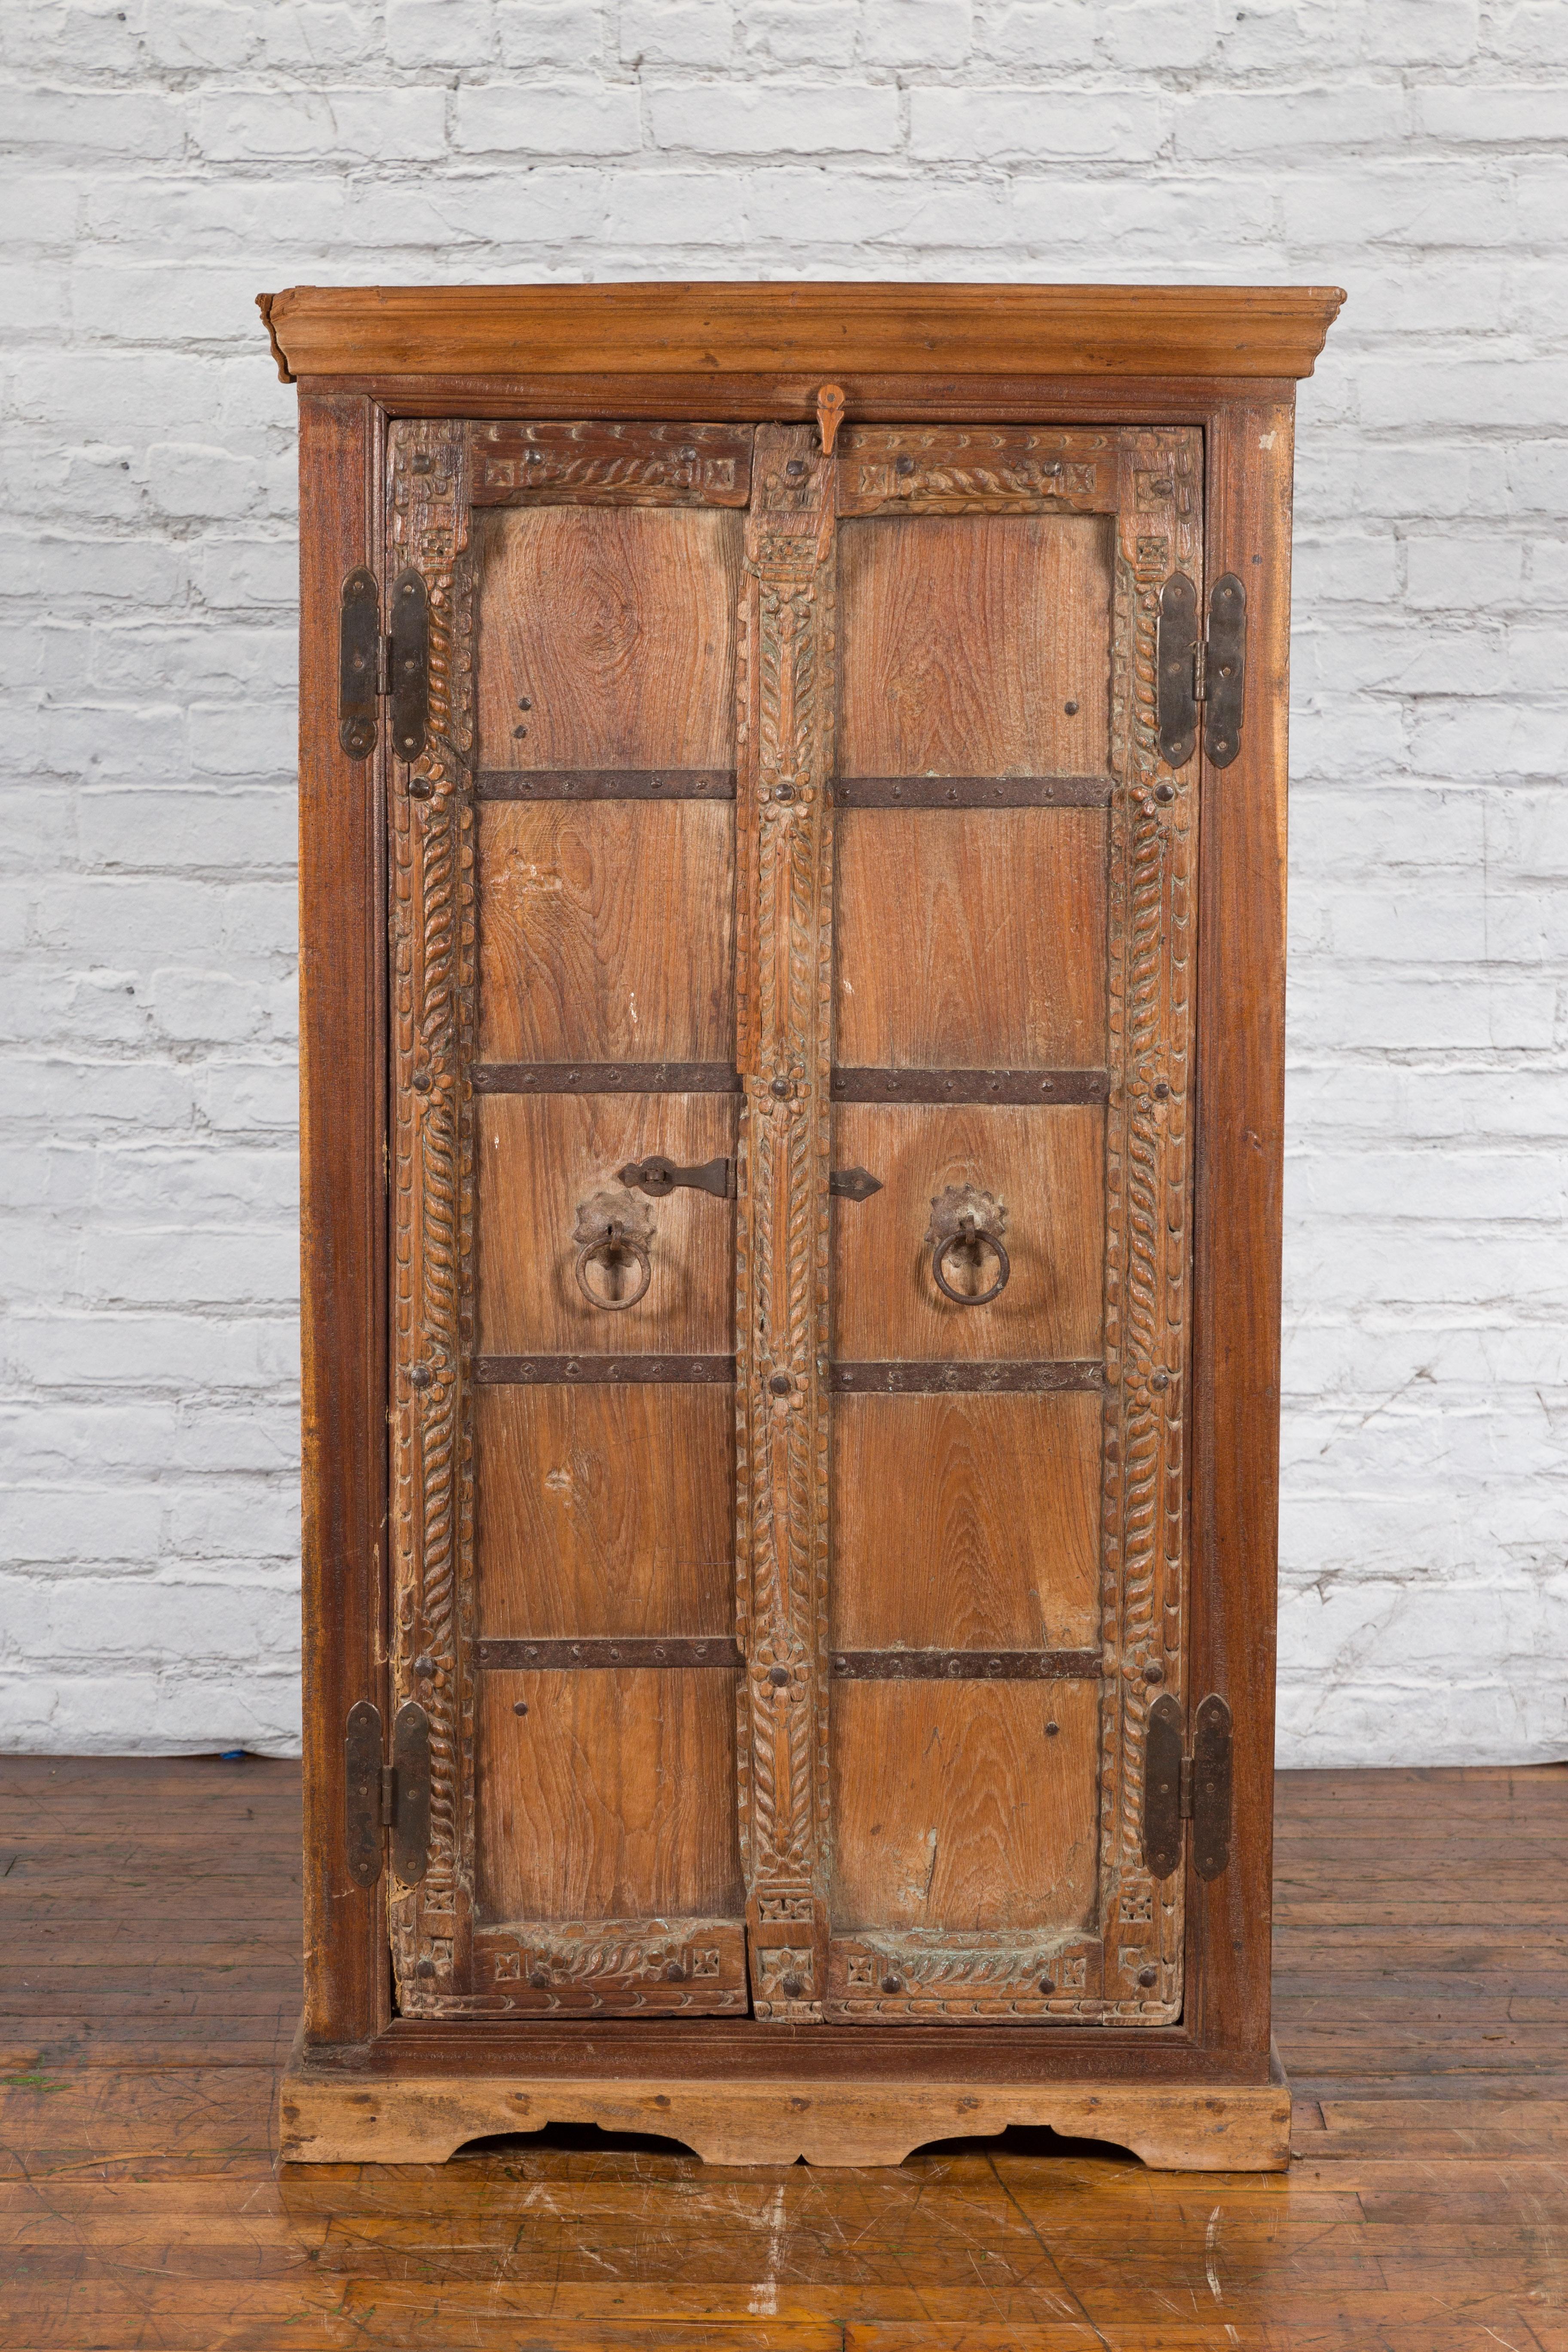 Antique 19th Century Indian Armoire with Metal Braces and Hand-Carved Décor 1